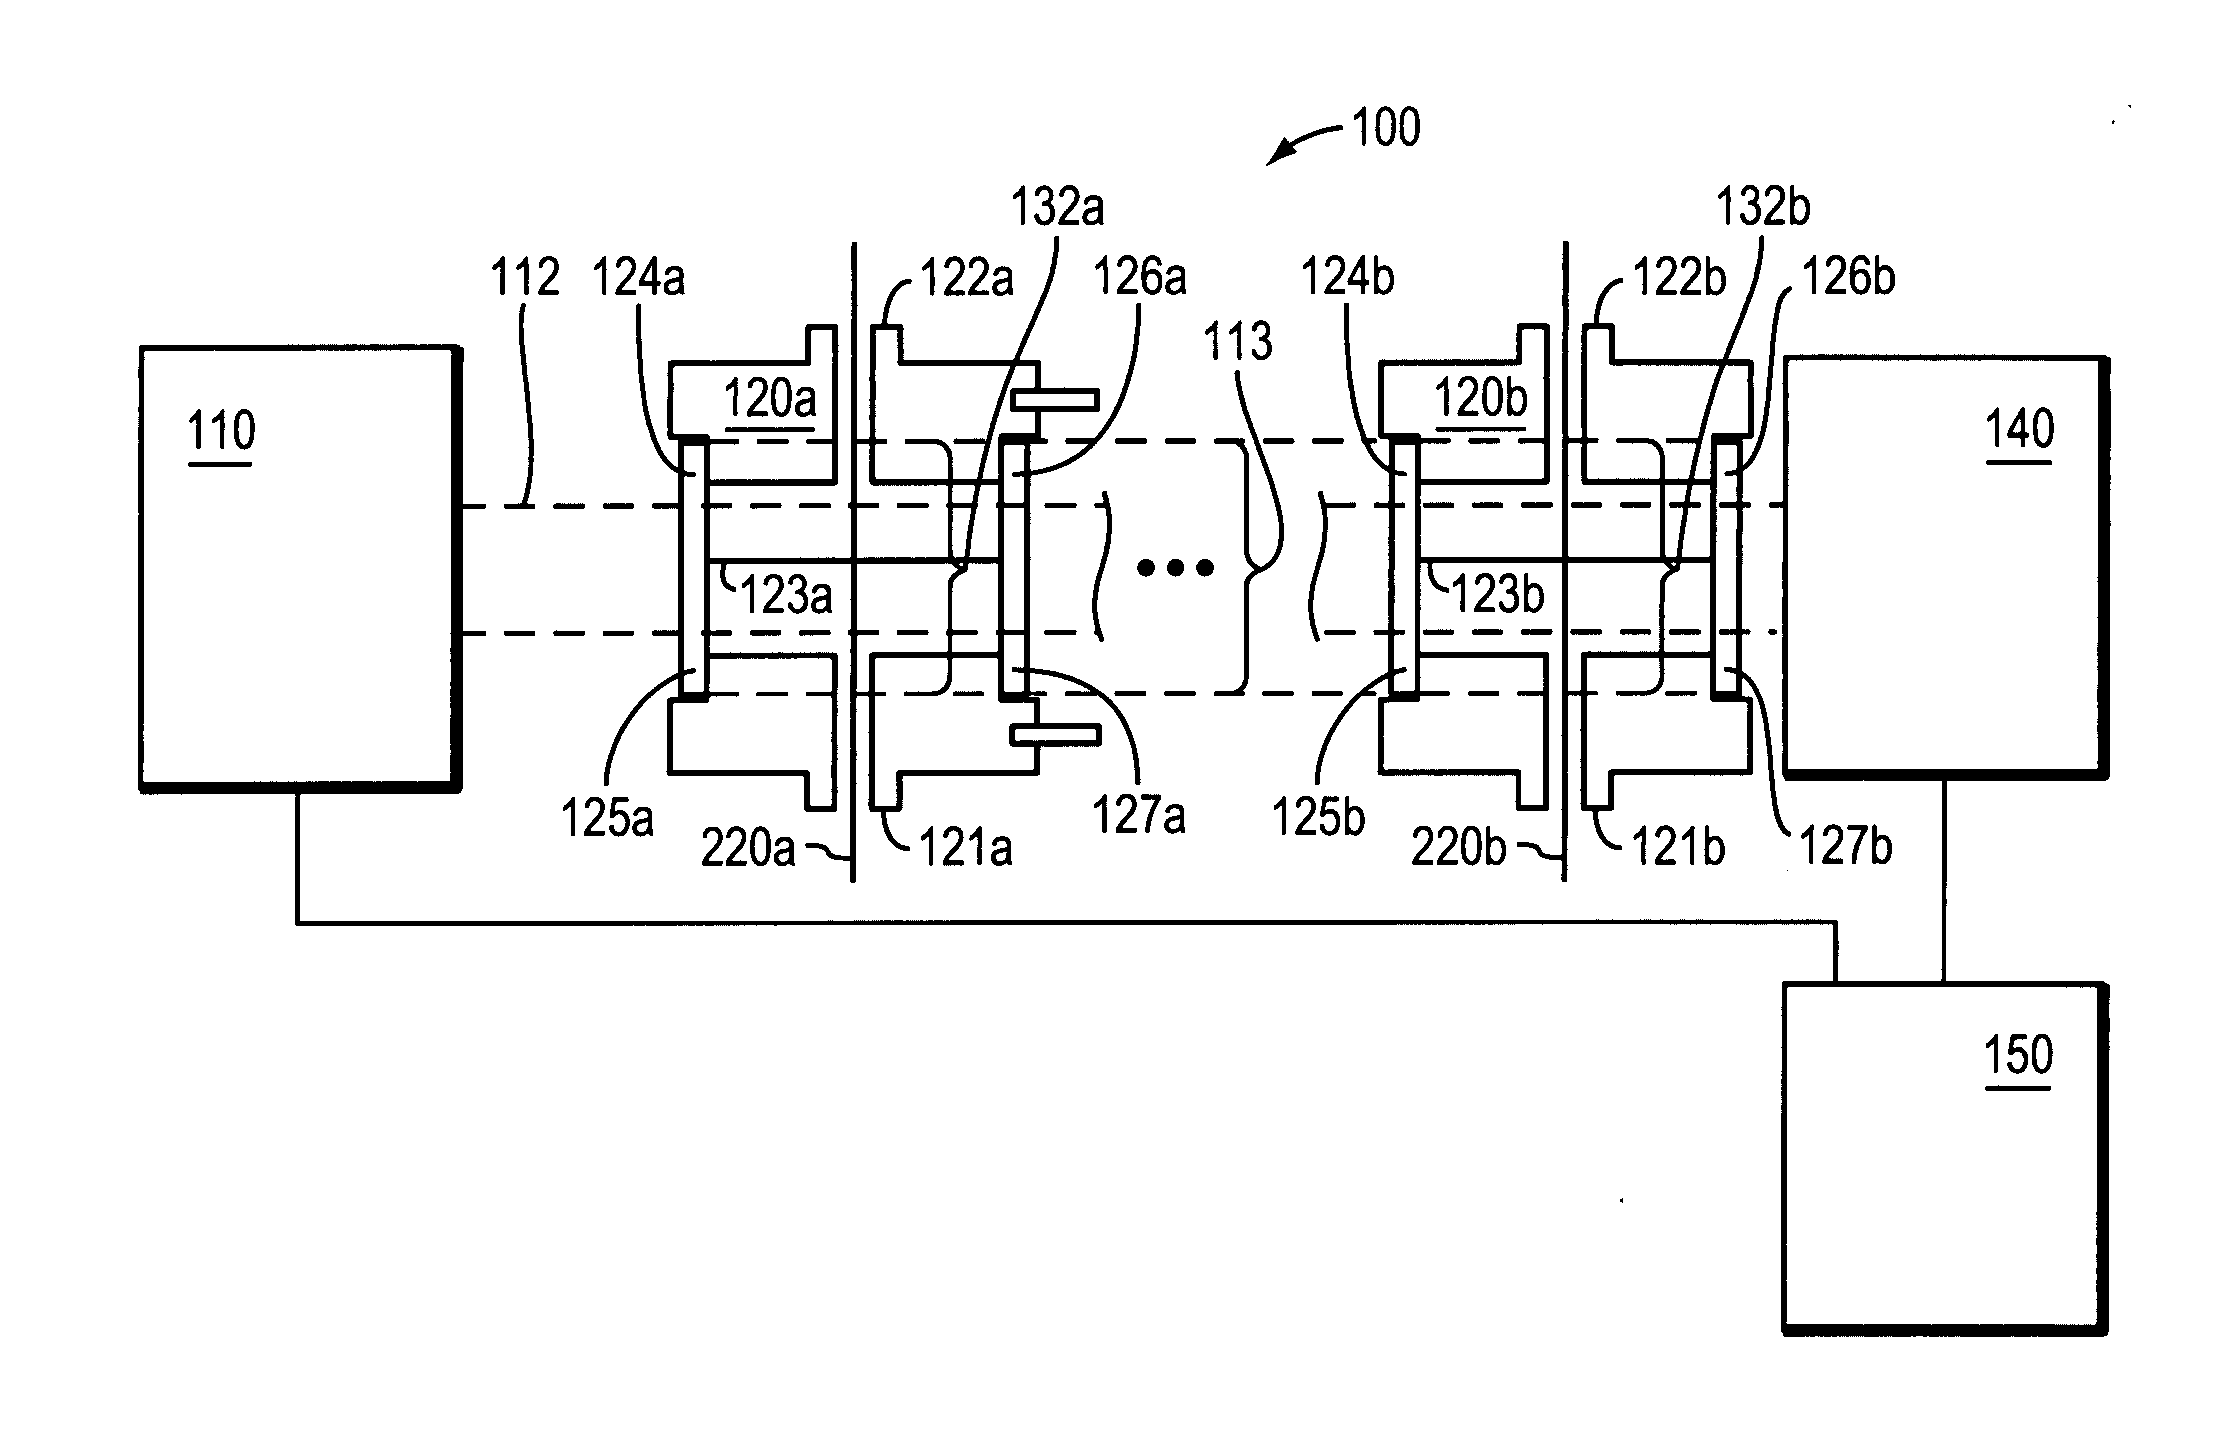 Linked extendable gas observation system for infrared absorption spectroscopy